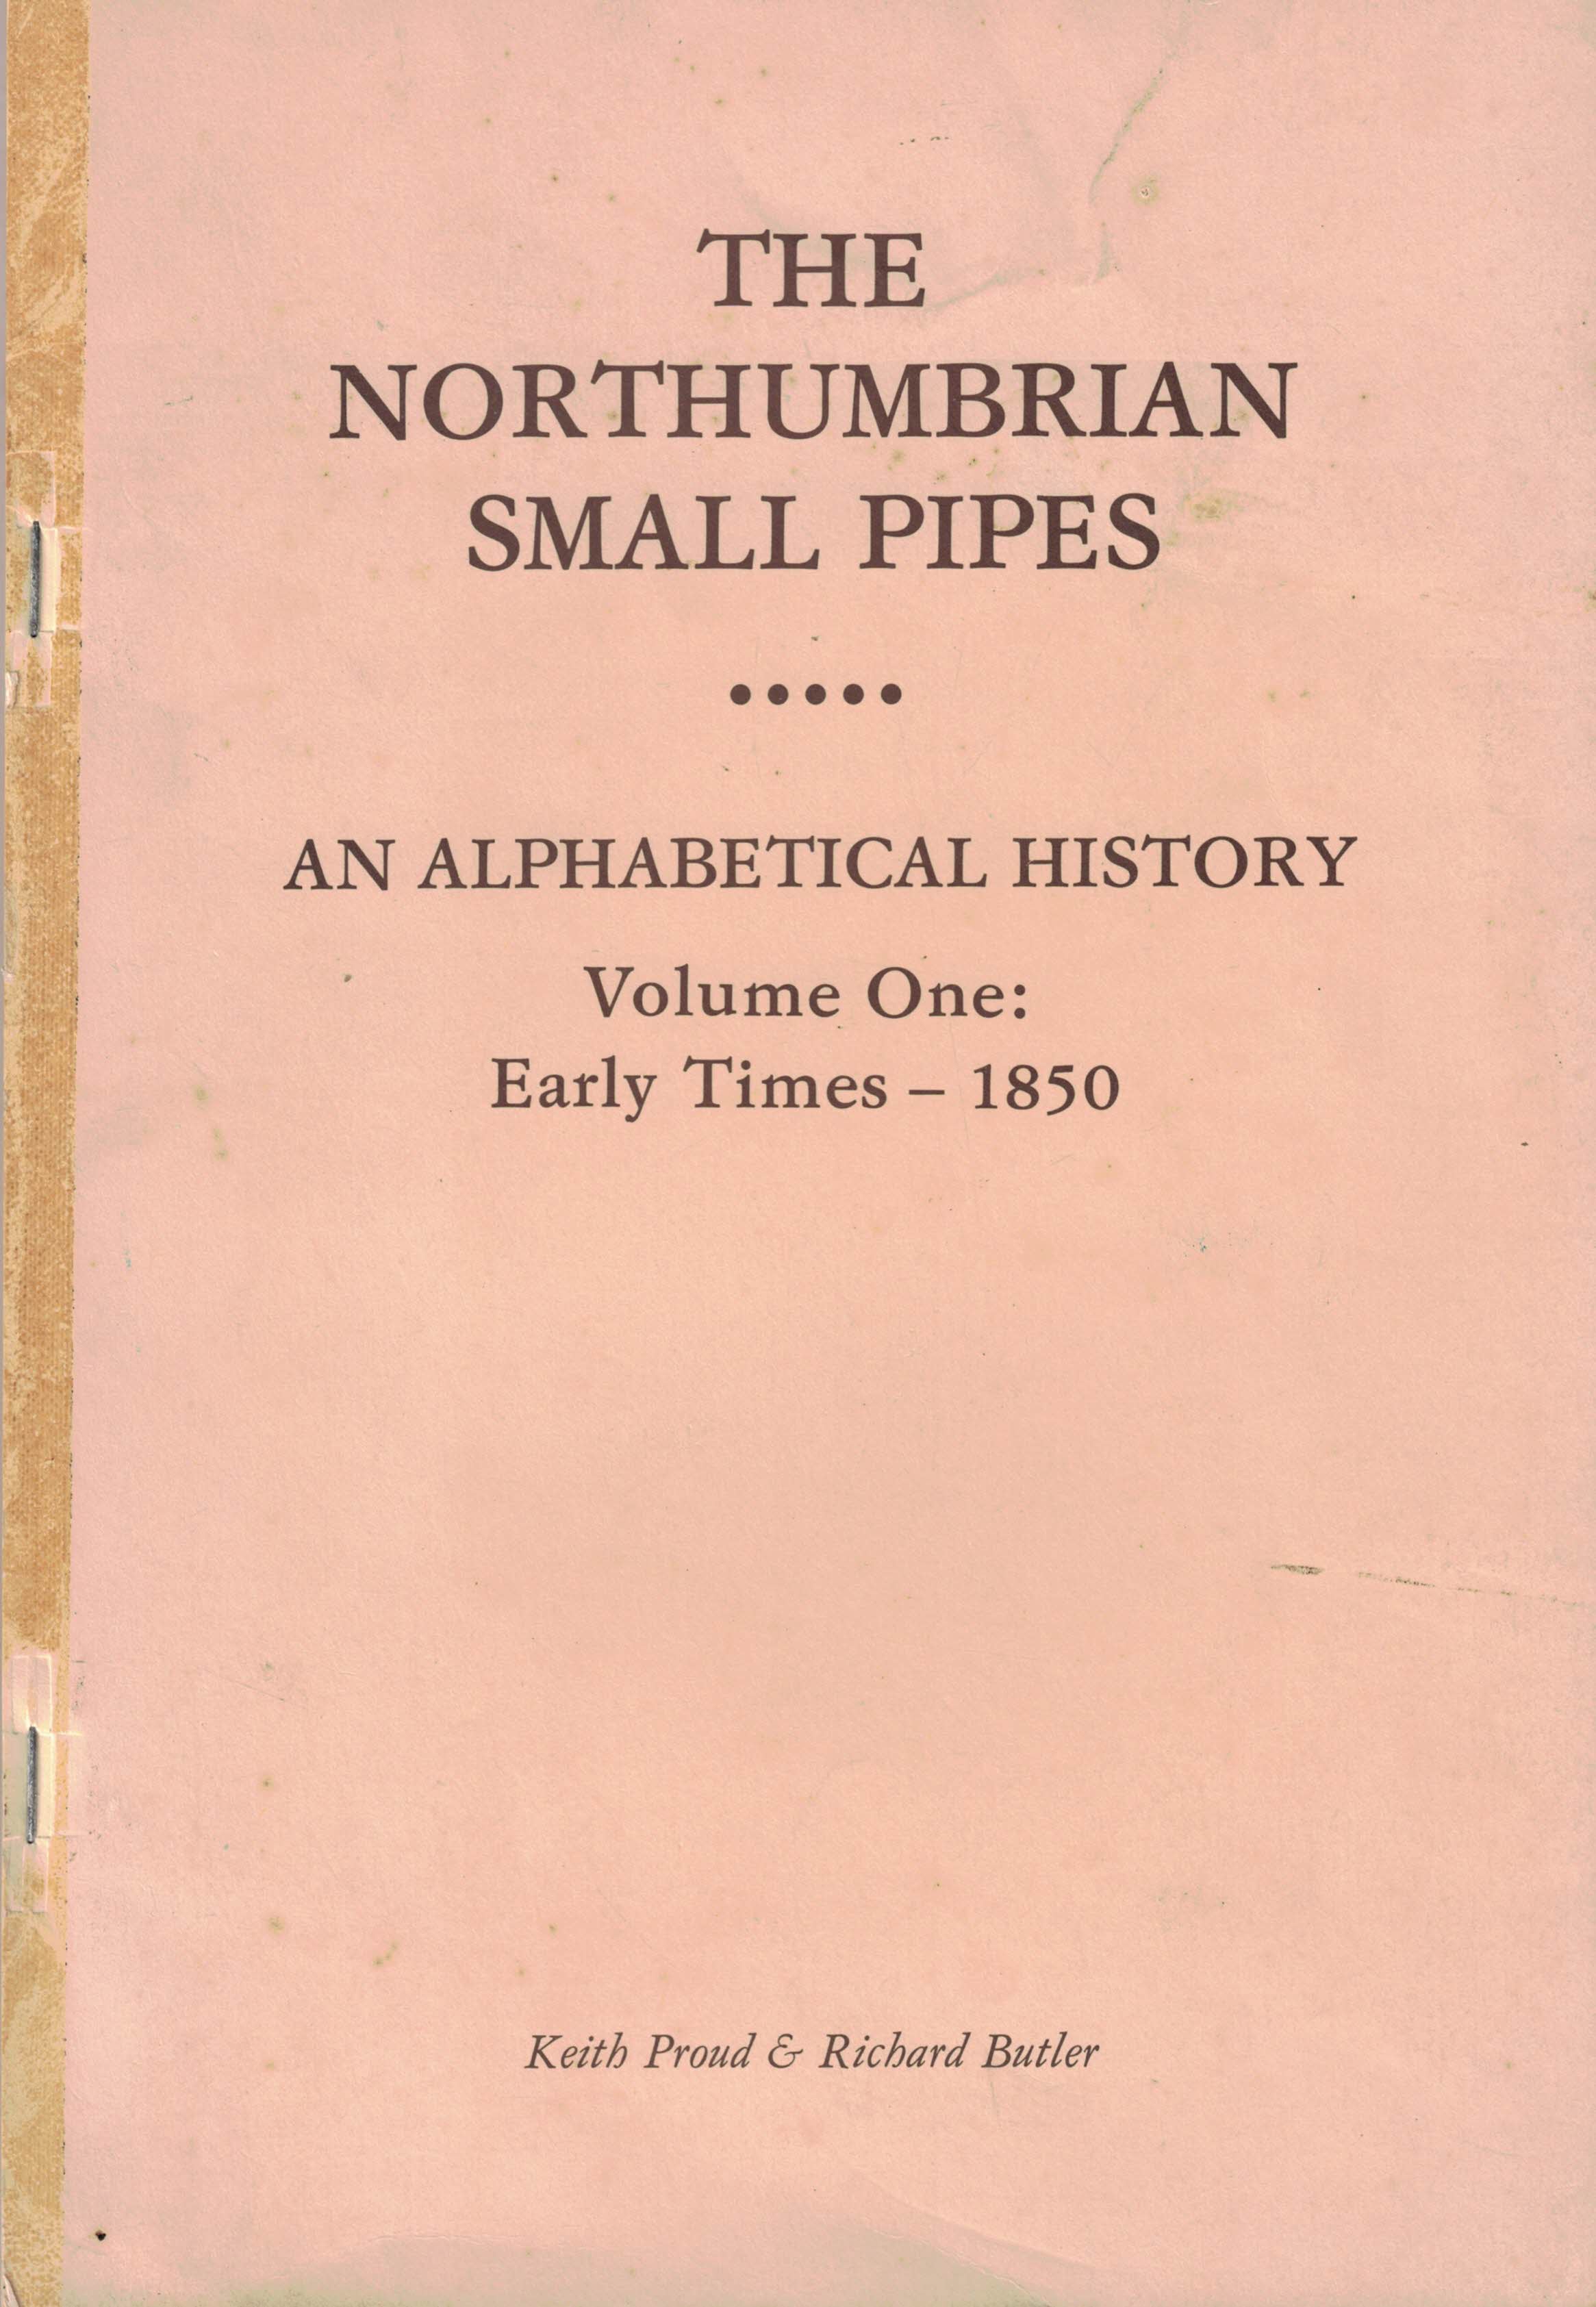 The Northumbrian Small Pipes. An Alphabetical History. Volume One: Early Times - 1850.